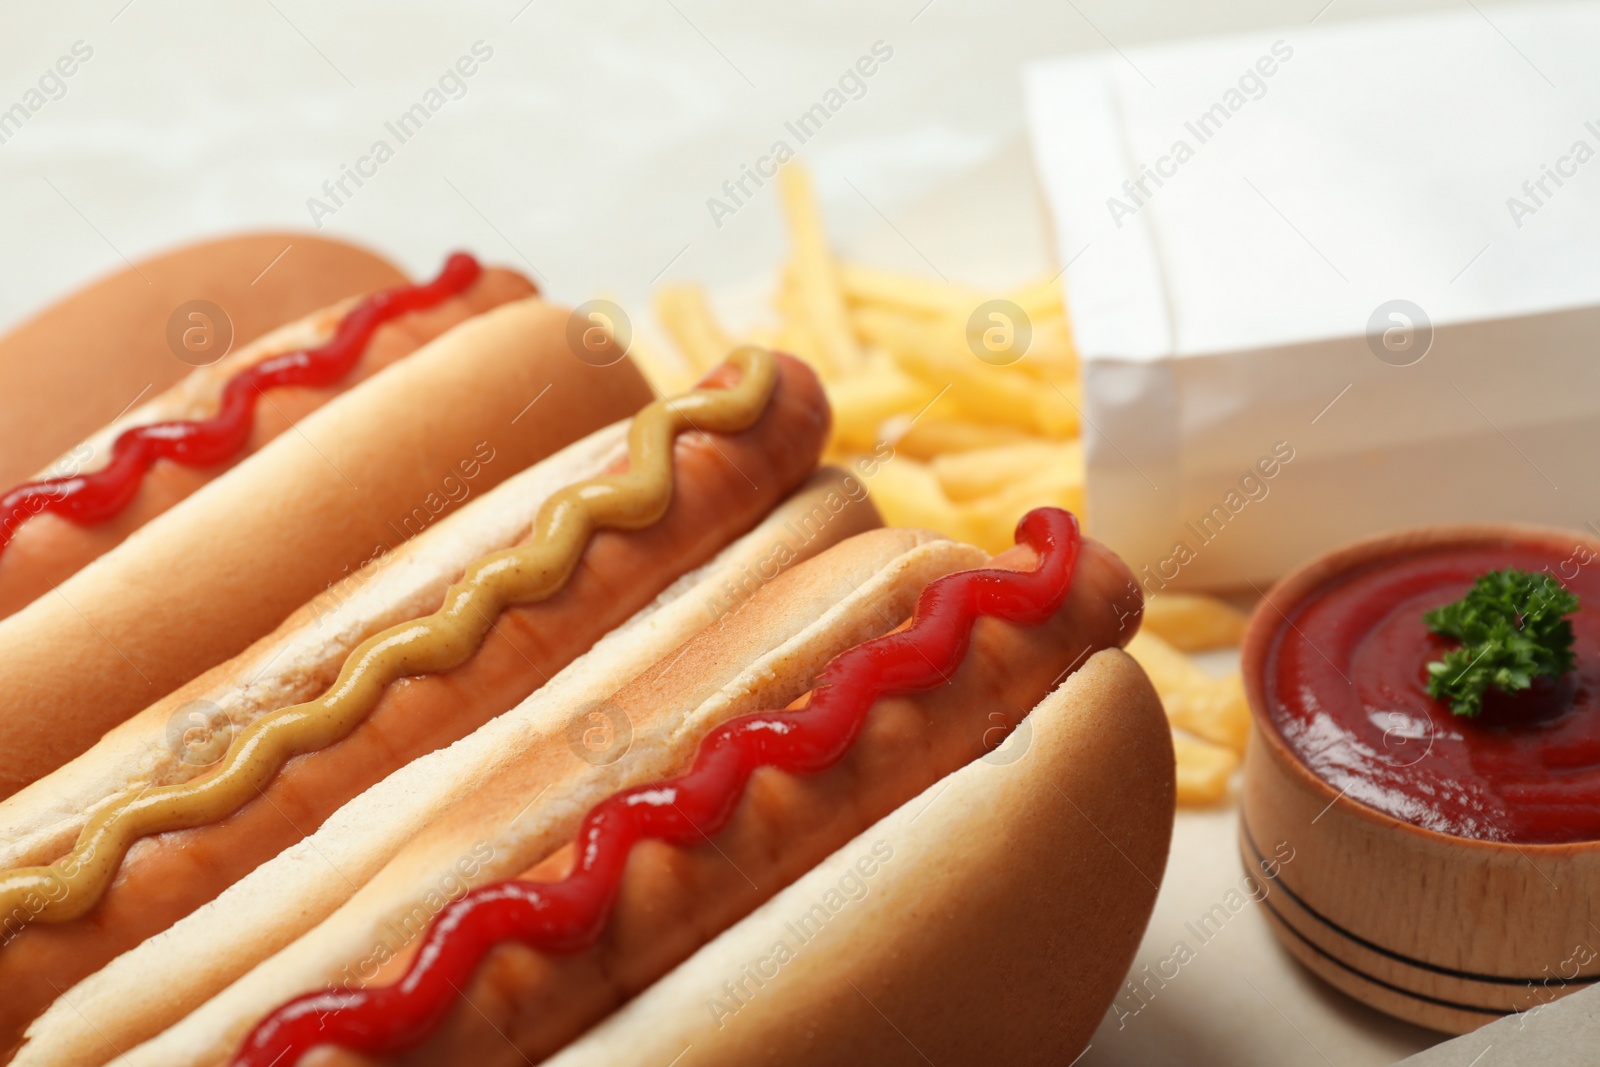 Photo of Tasty hot dogs with mustard and ketchup on table, closeup